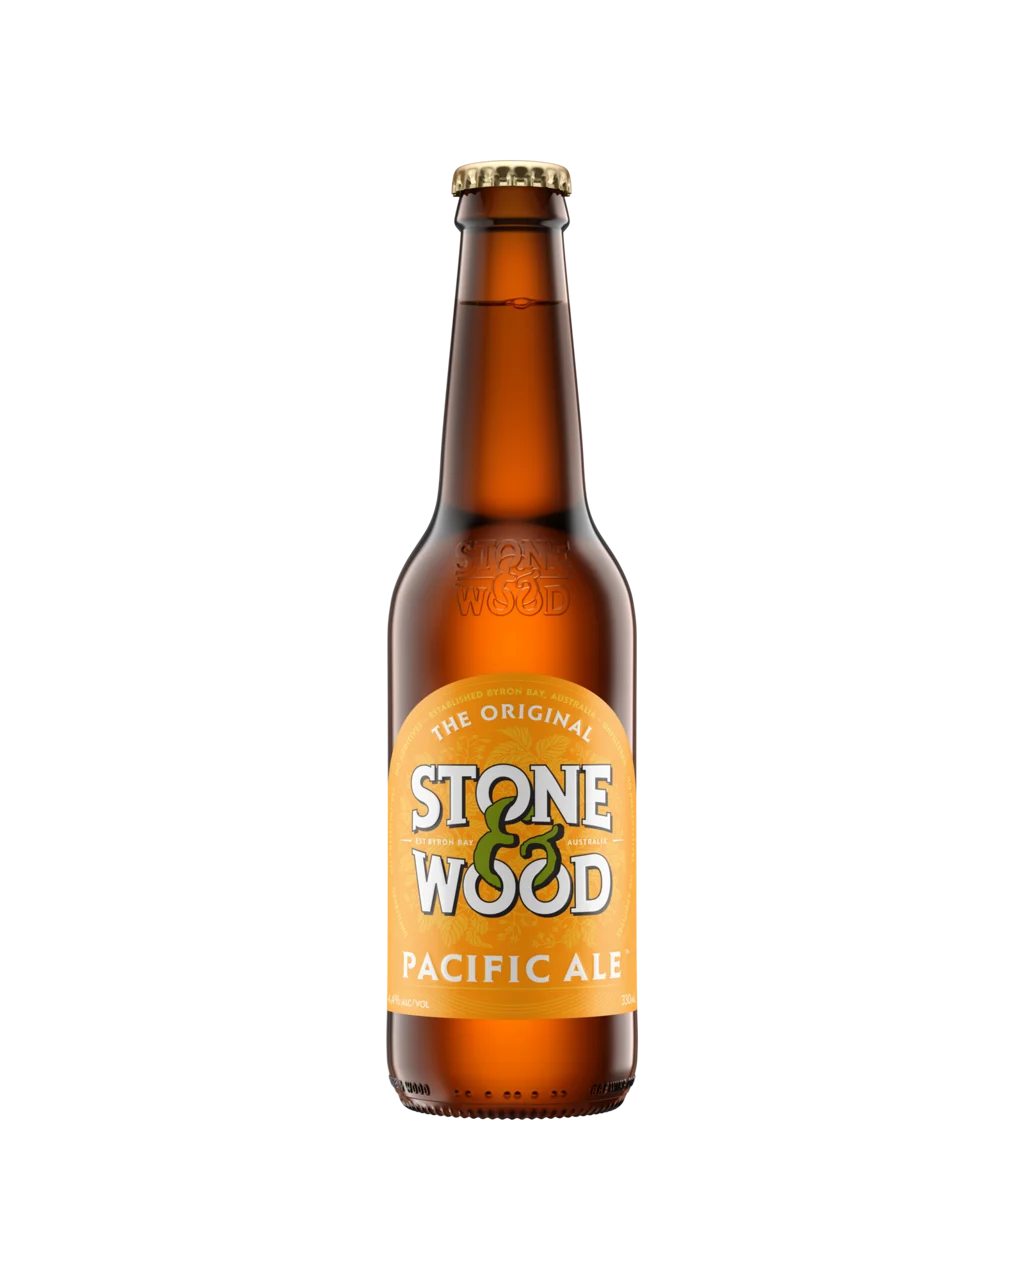 Stone & Wood Pacific Ale 330ml